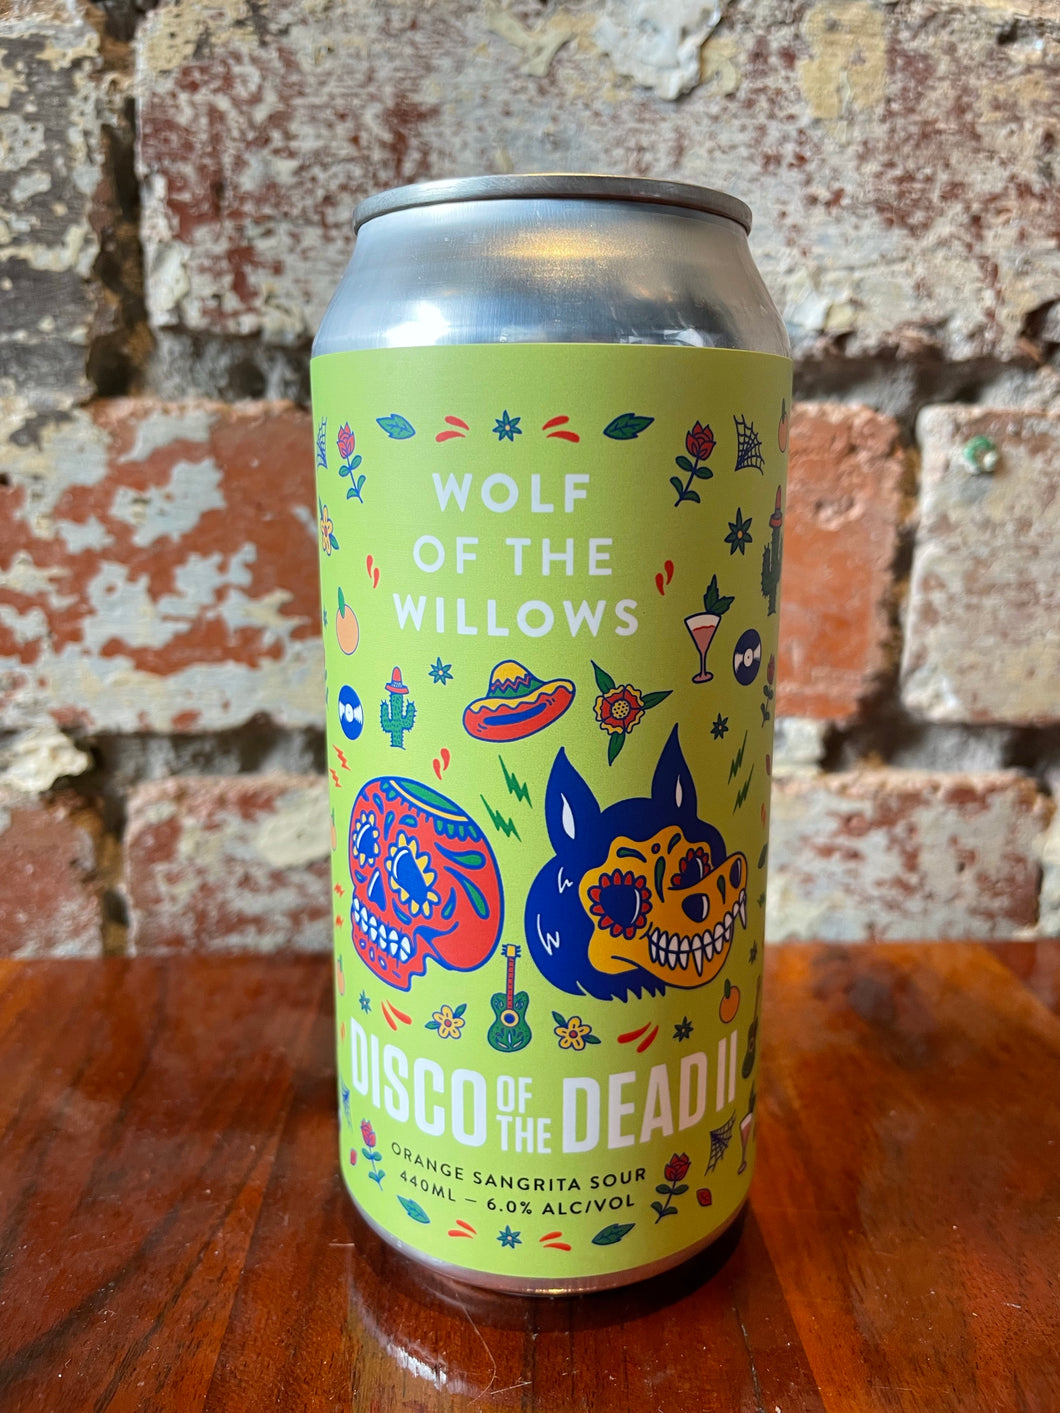 Wolf of the Willows Disco of the Dead Orange Sangrita Sour